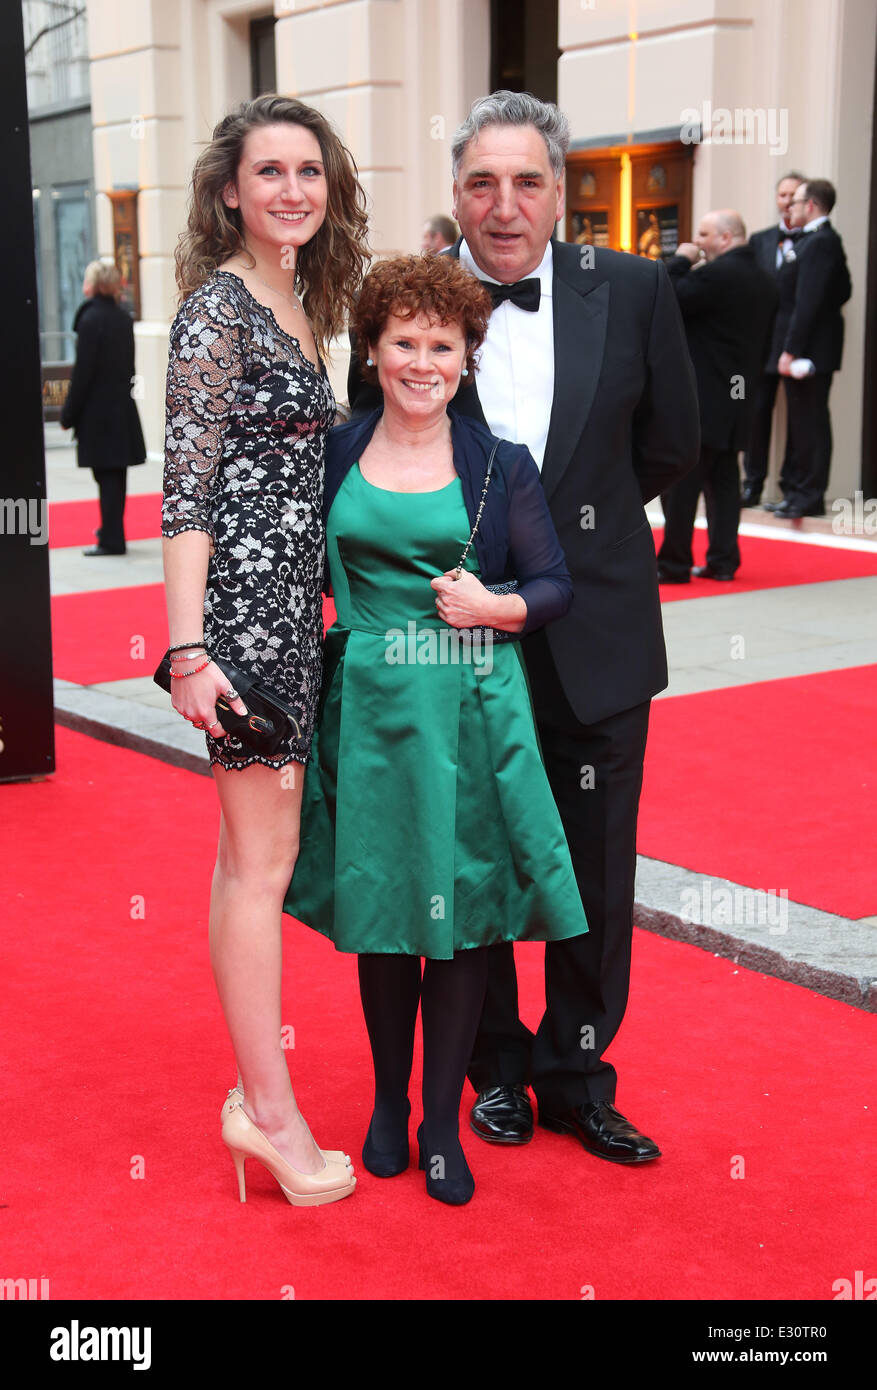 The Laurence Olivier Awards 2013 held at the Royal Opera House - Arrivals  Featuring: Imelda Staunton,daughter,husband Where: London, United Kingdom When: 28 Apr 2013 Stock Photo